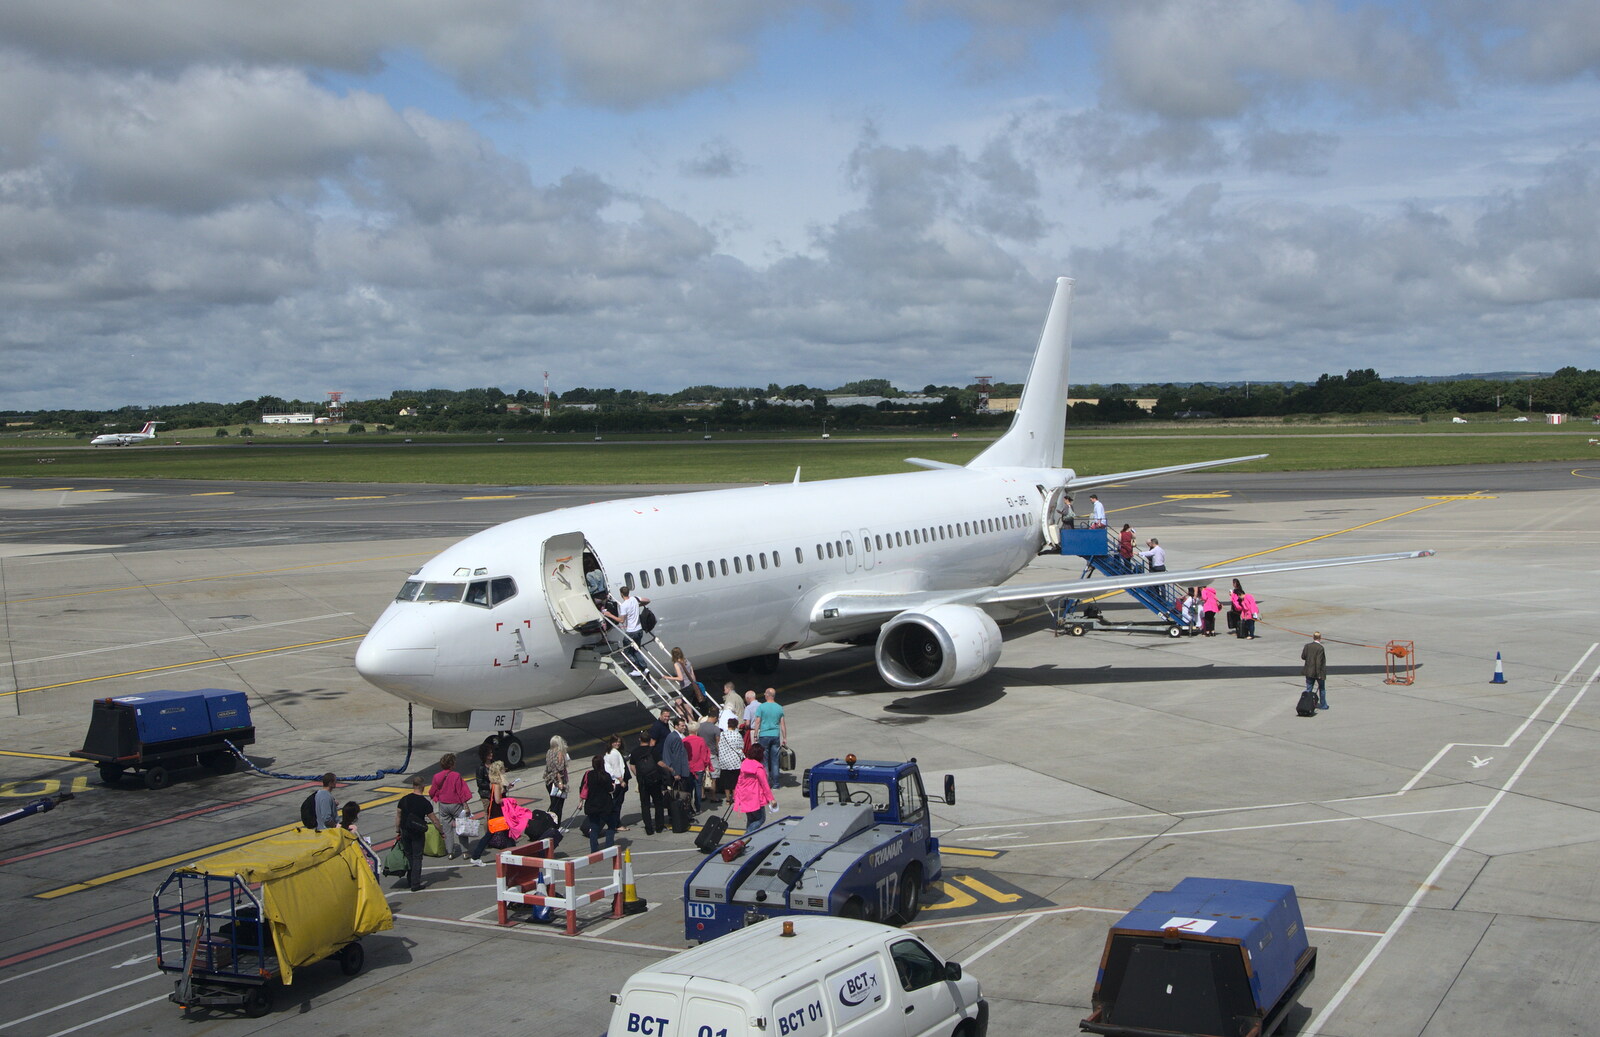 A very anonymous 737 loads up at Dublin airport from A Night Out in Dublin, County Dublin, Ireland - 9th August 2014